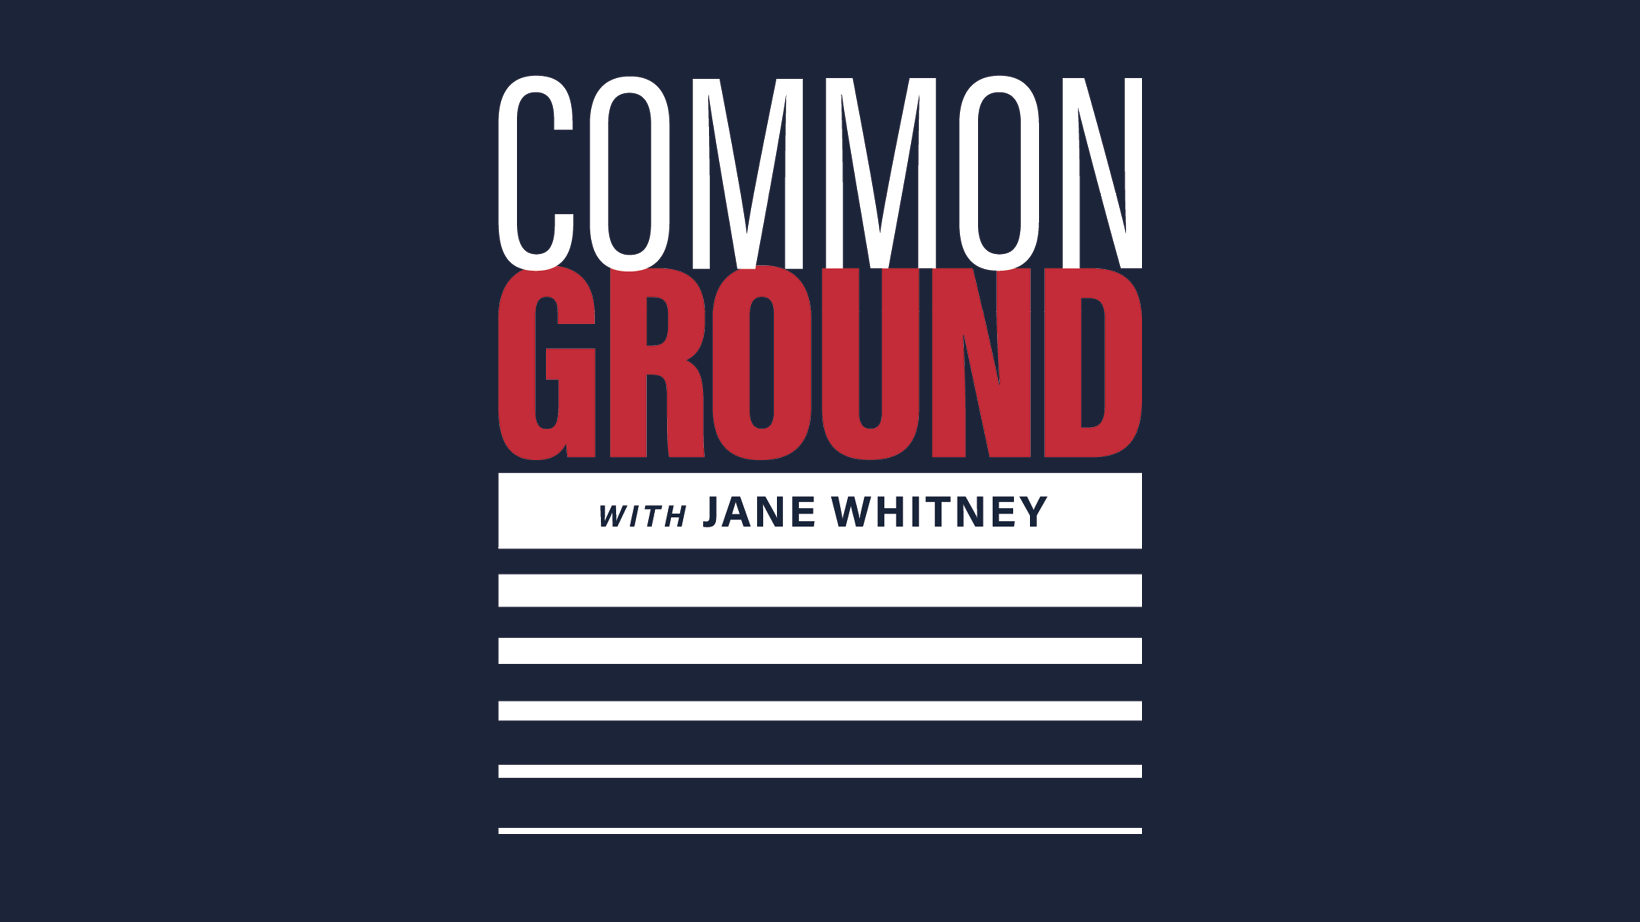 Check out Common Ground With Jane Whitney Season 3 airing on a public television station near you!